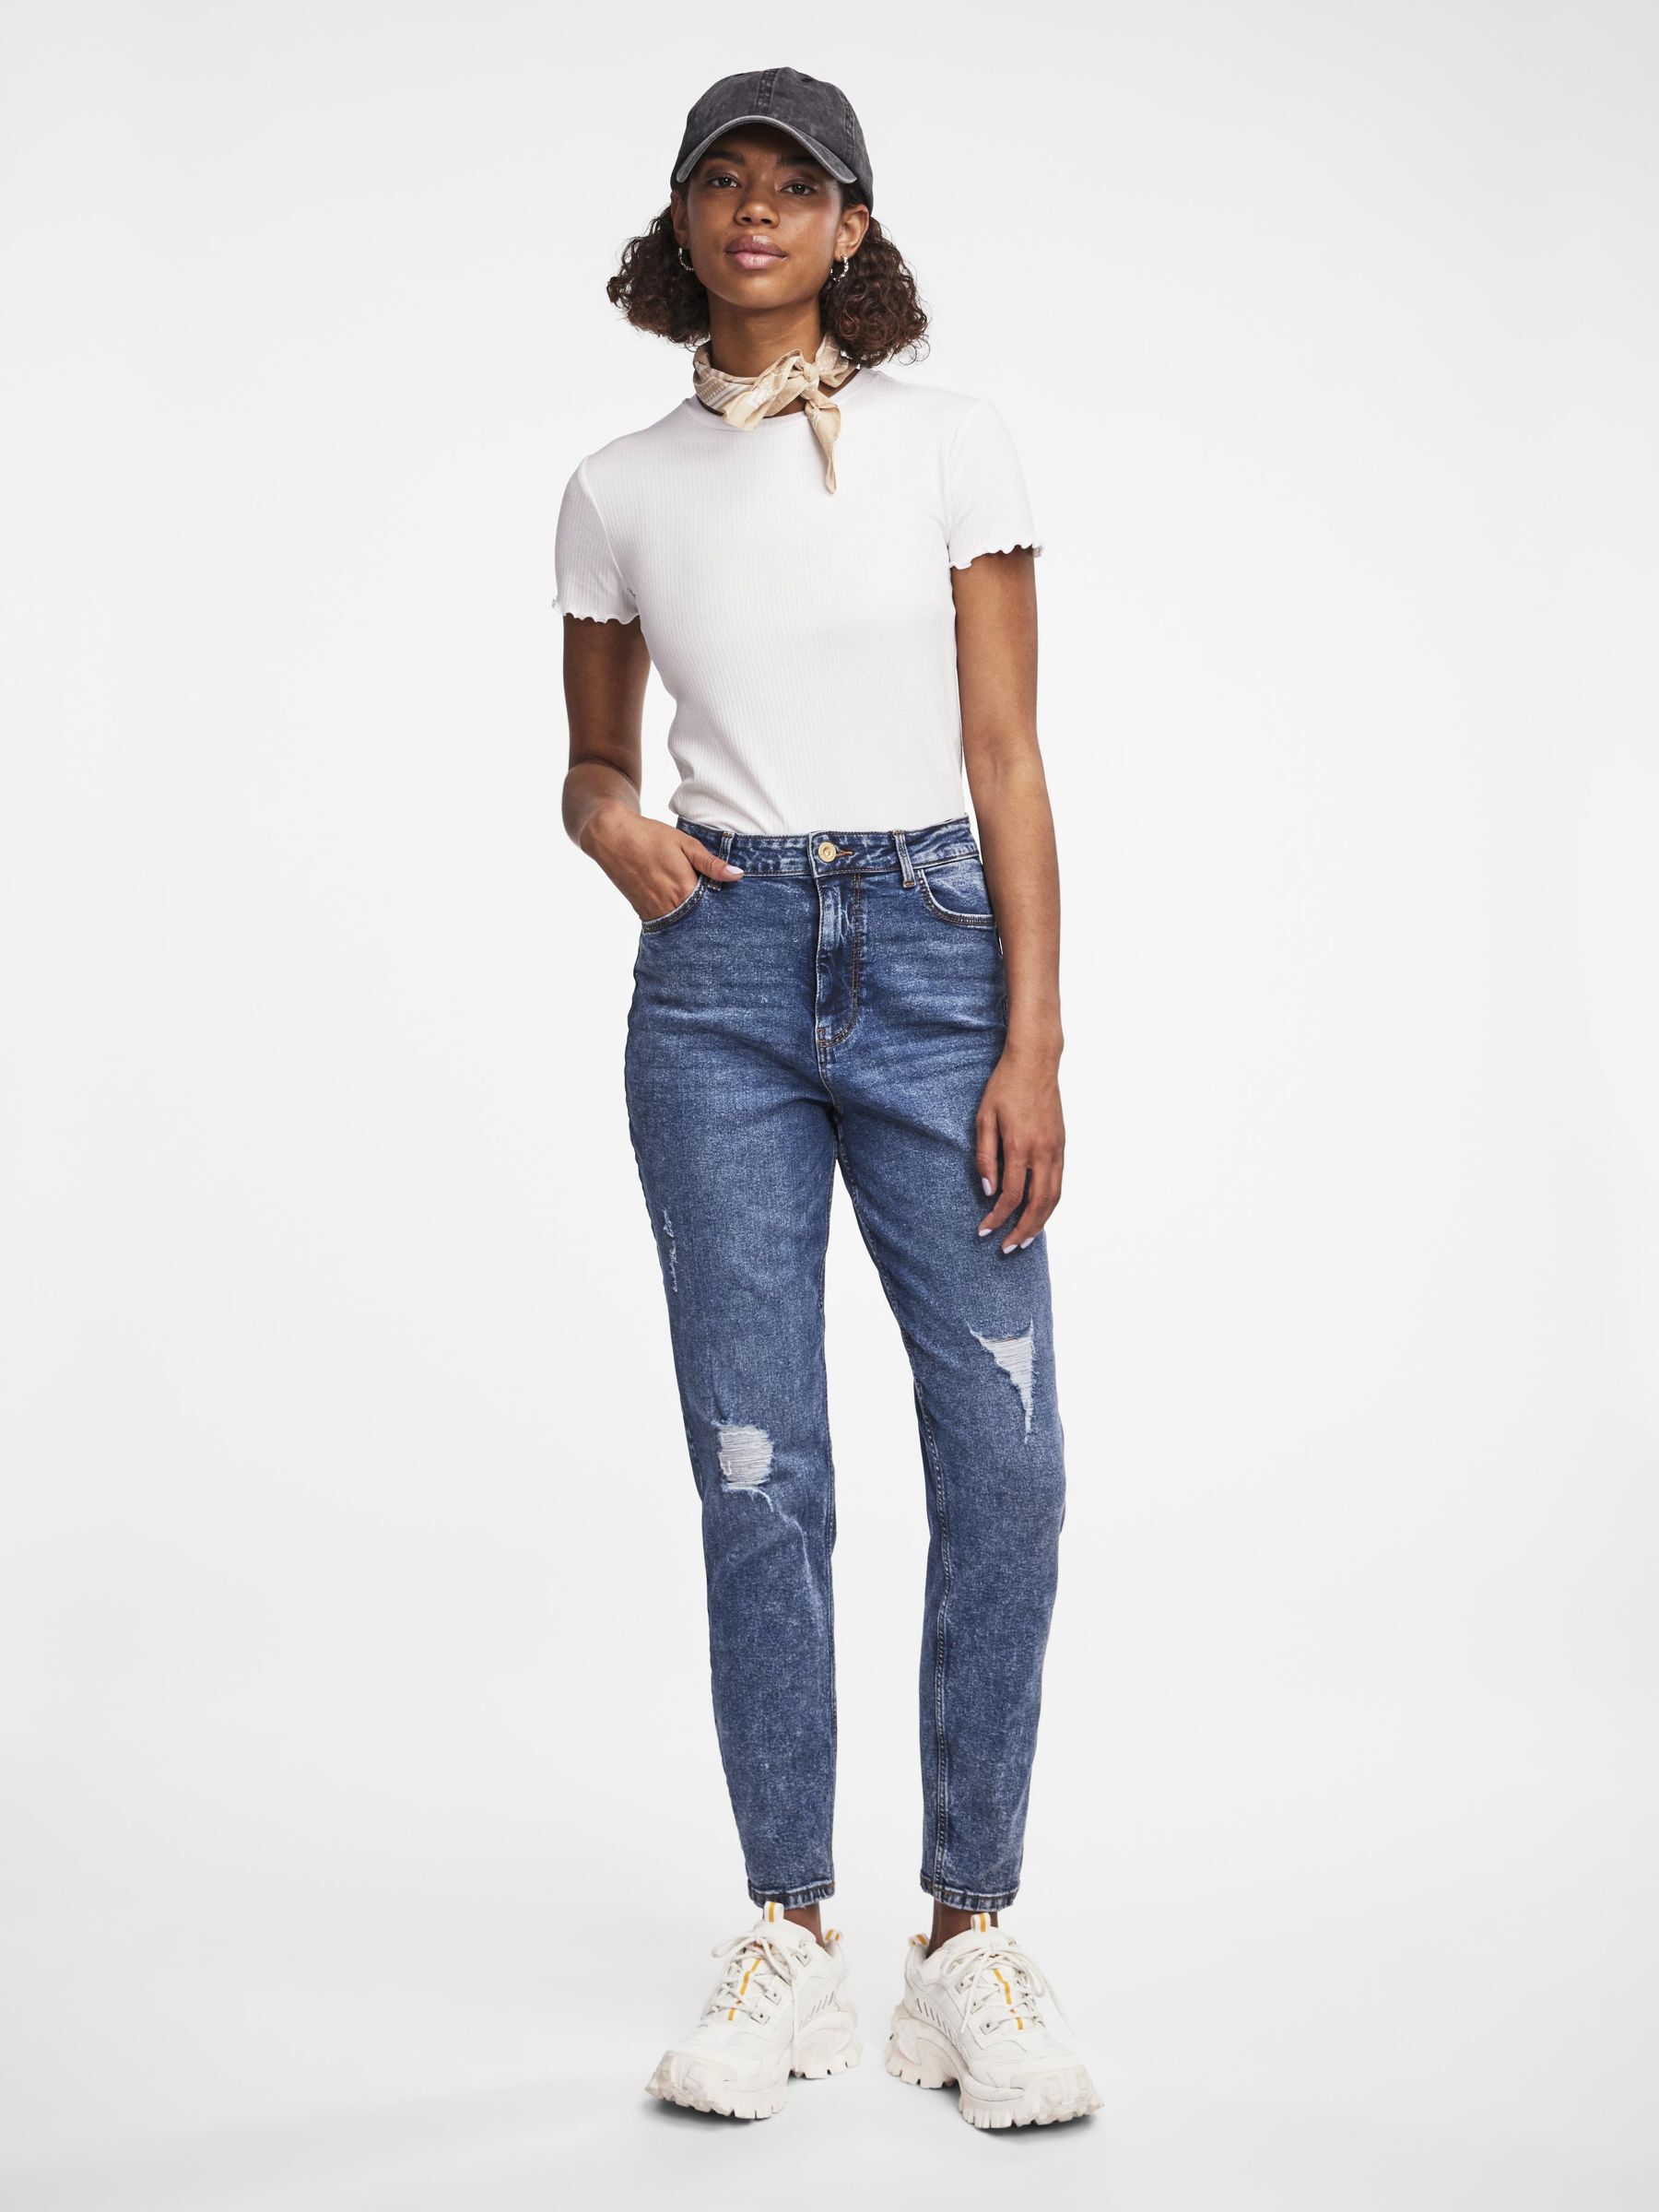 Mom jeans but make it fashion! - Colour me in style